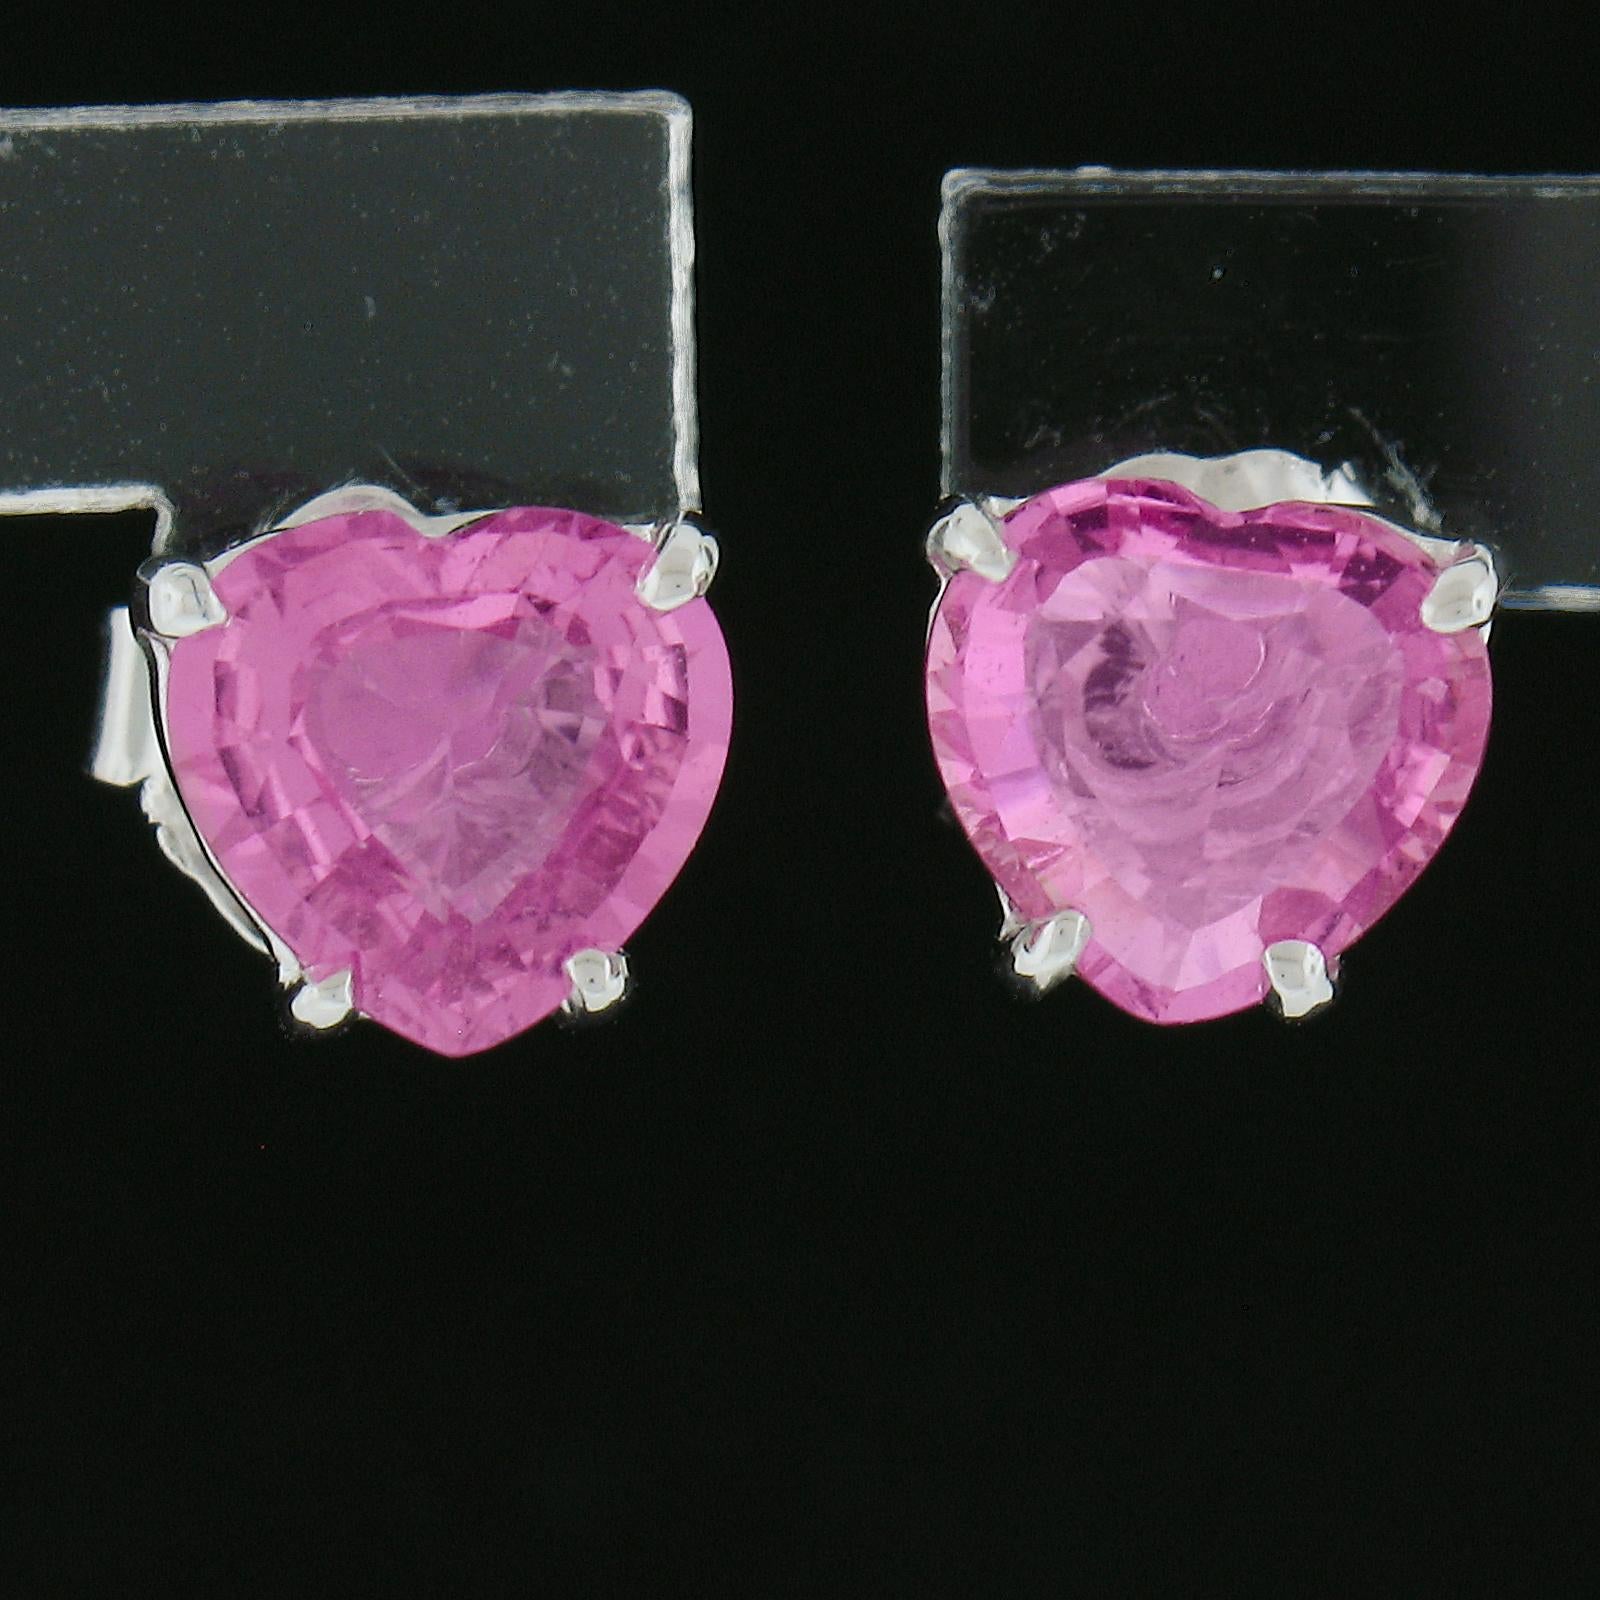 --Stone(s):--
(2) Natural Genuine Sapphires - Heart Brilliant Cut - Prong Set - Vivid Pink Color 
Total Carat Weight:	1.44 (exact.)

Material: 14k Solid White Gold
Weight: 1.16 Grams
Backing: Post Back w/ Butterfly Closure (pierced ears are